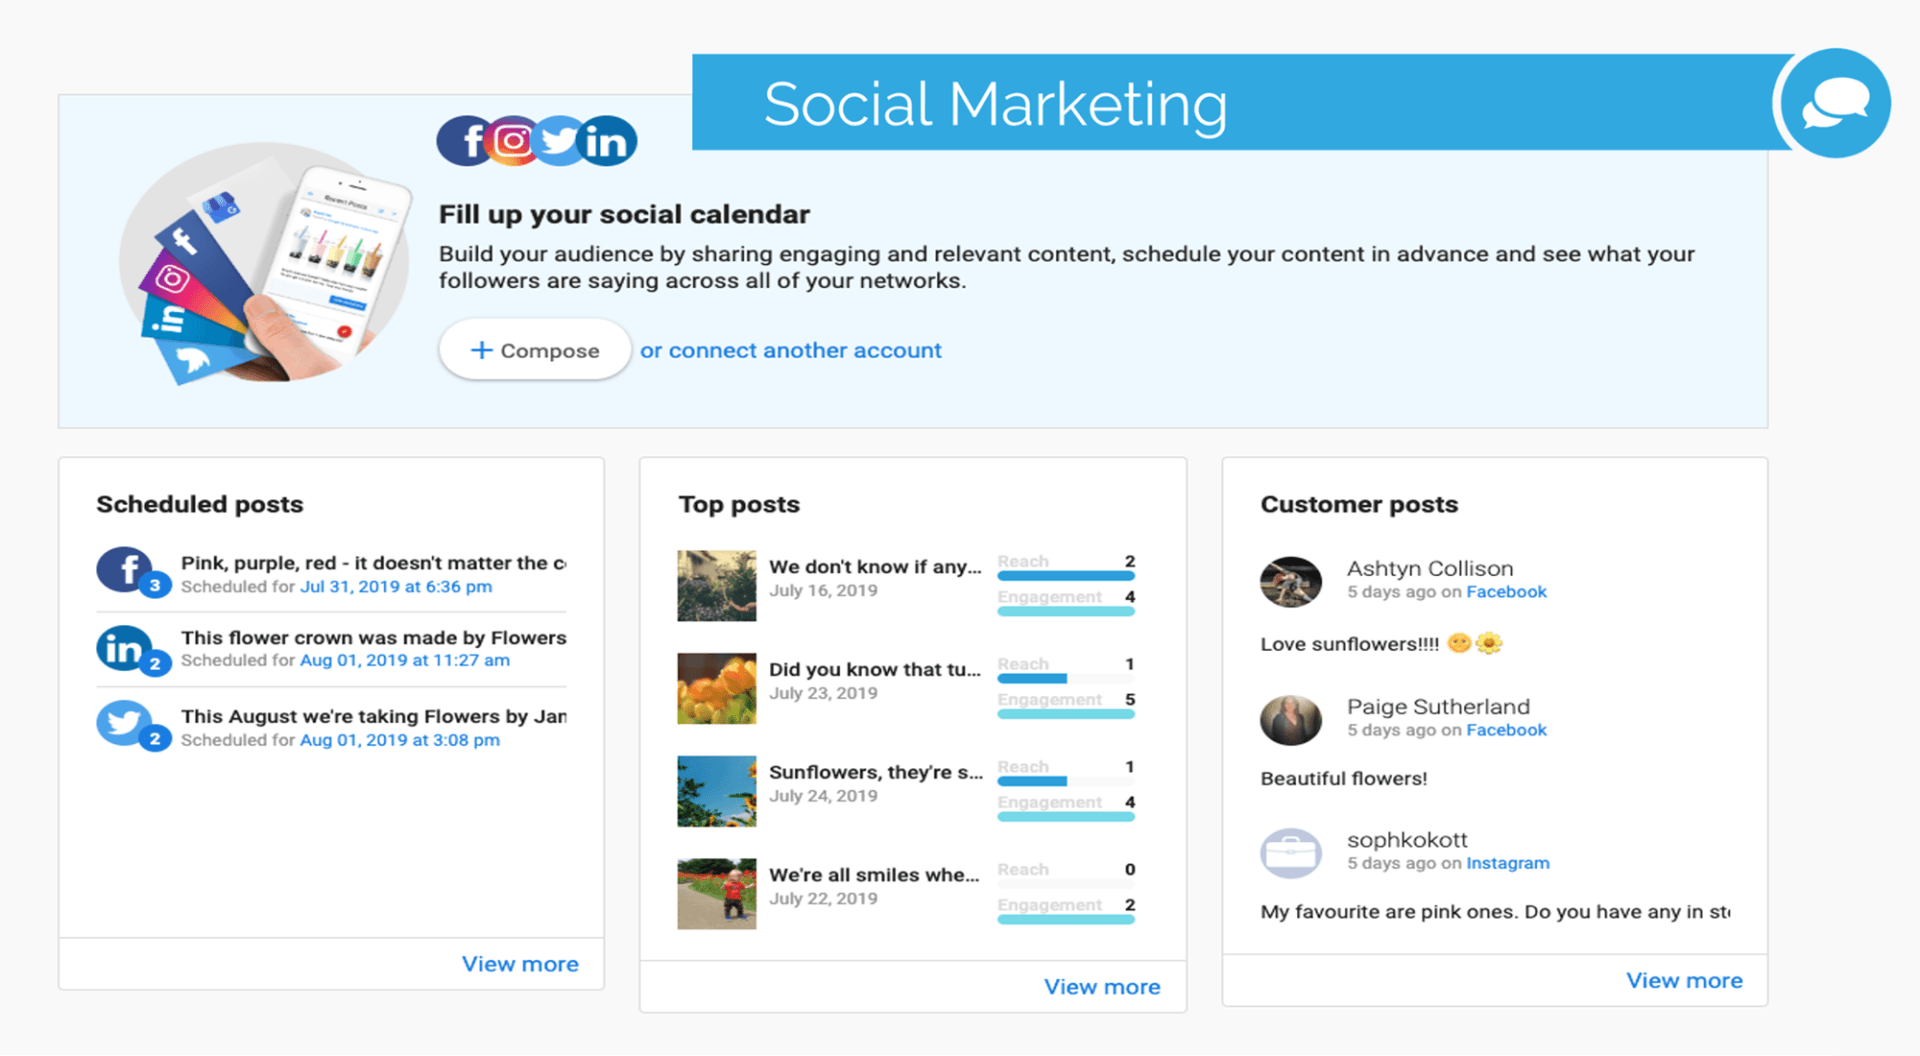 Dashboard for social media marketer pro and social media marketing from Business Launch Kit